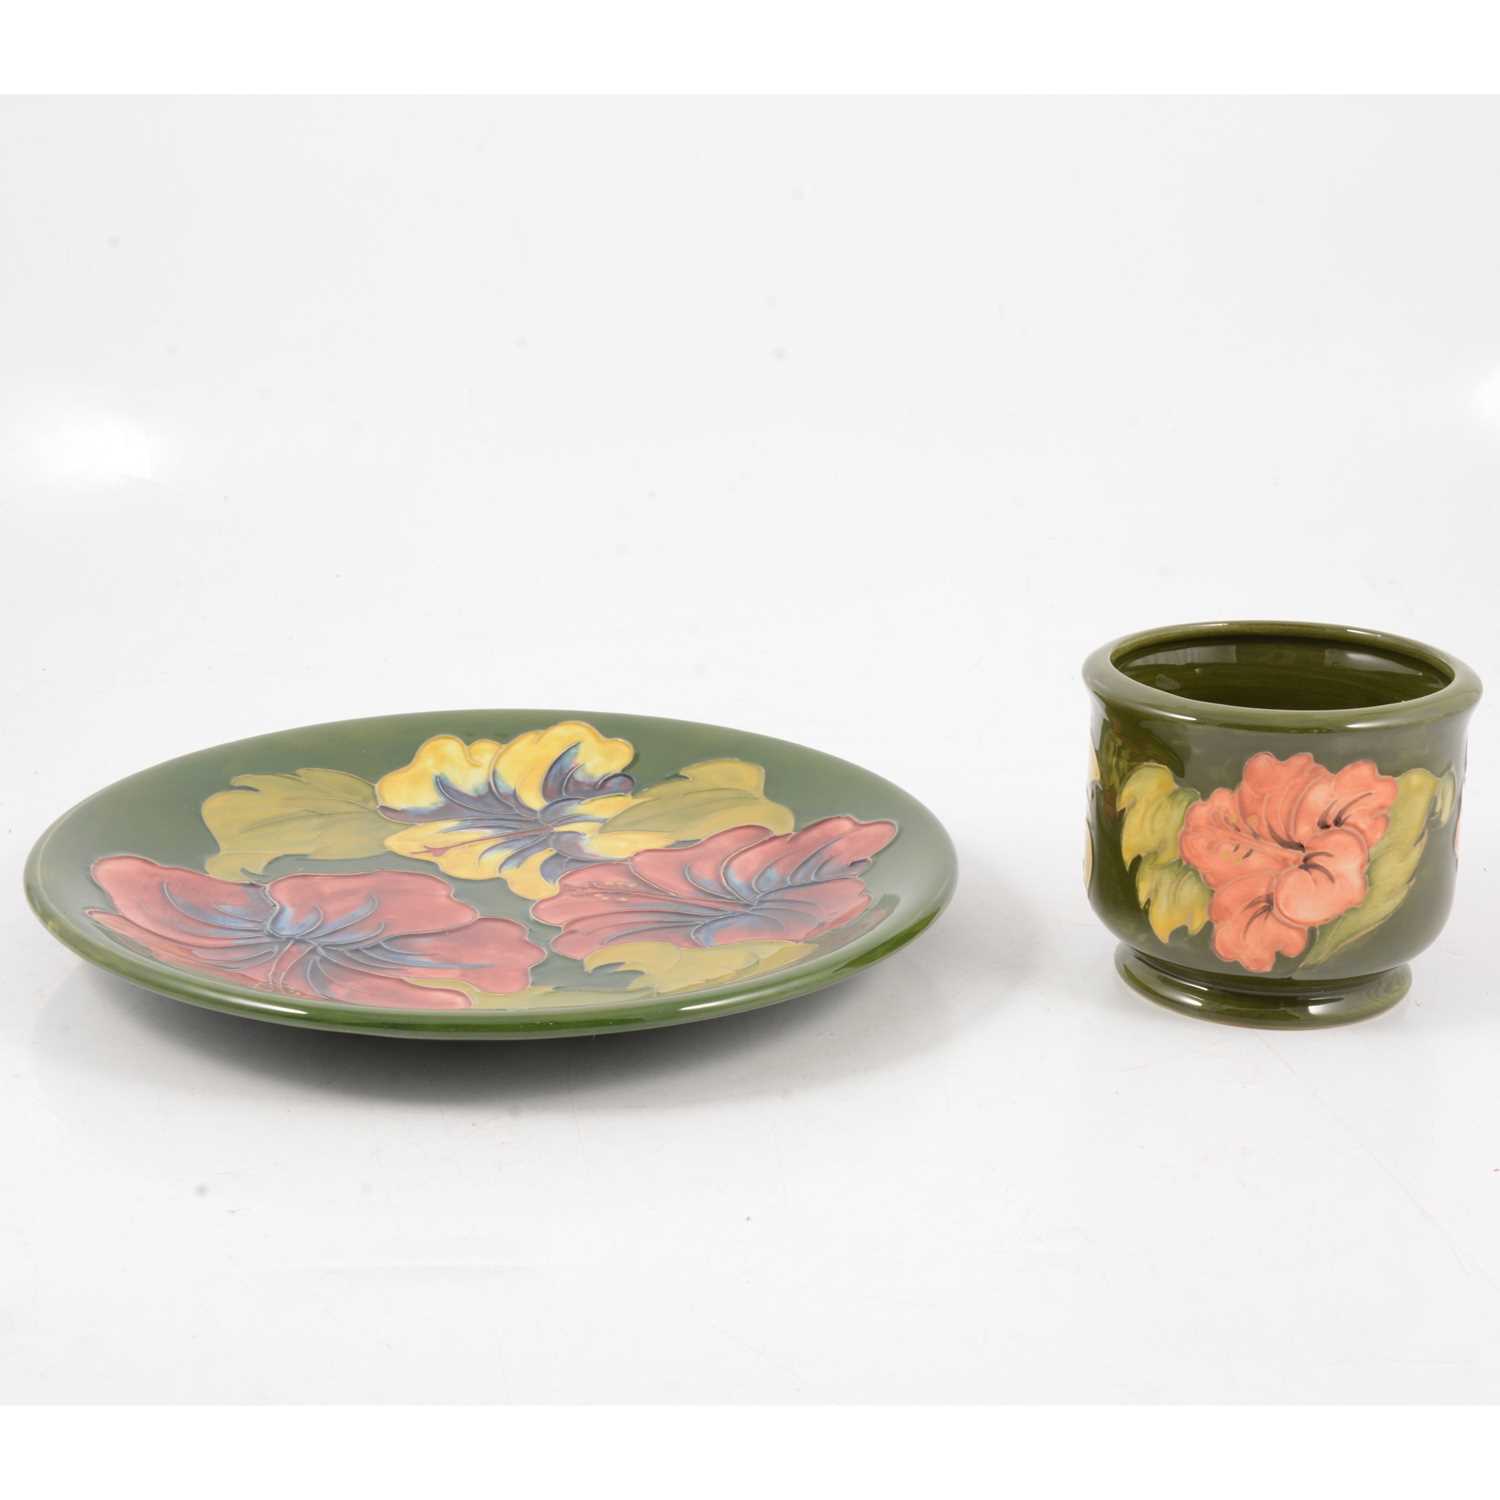 Lot 47 - Moorcroft Pottery, Hibiscus pattern jardiniere and a 10" plate